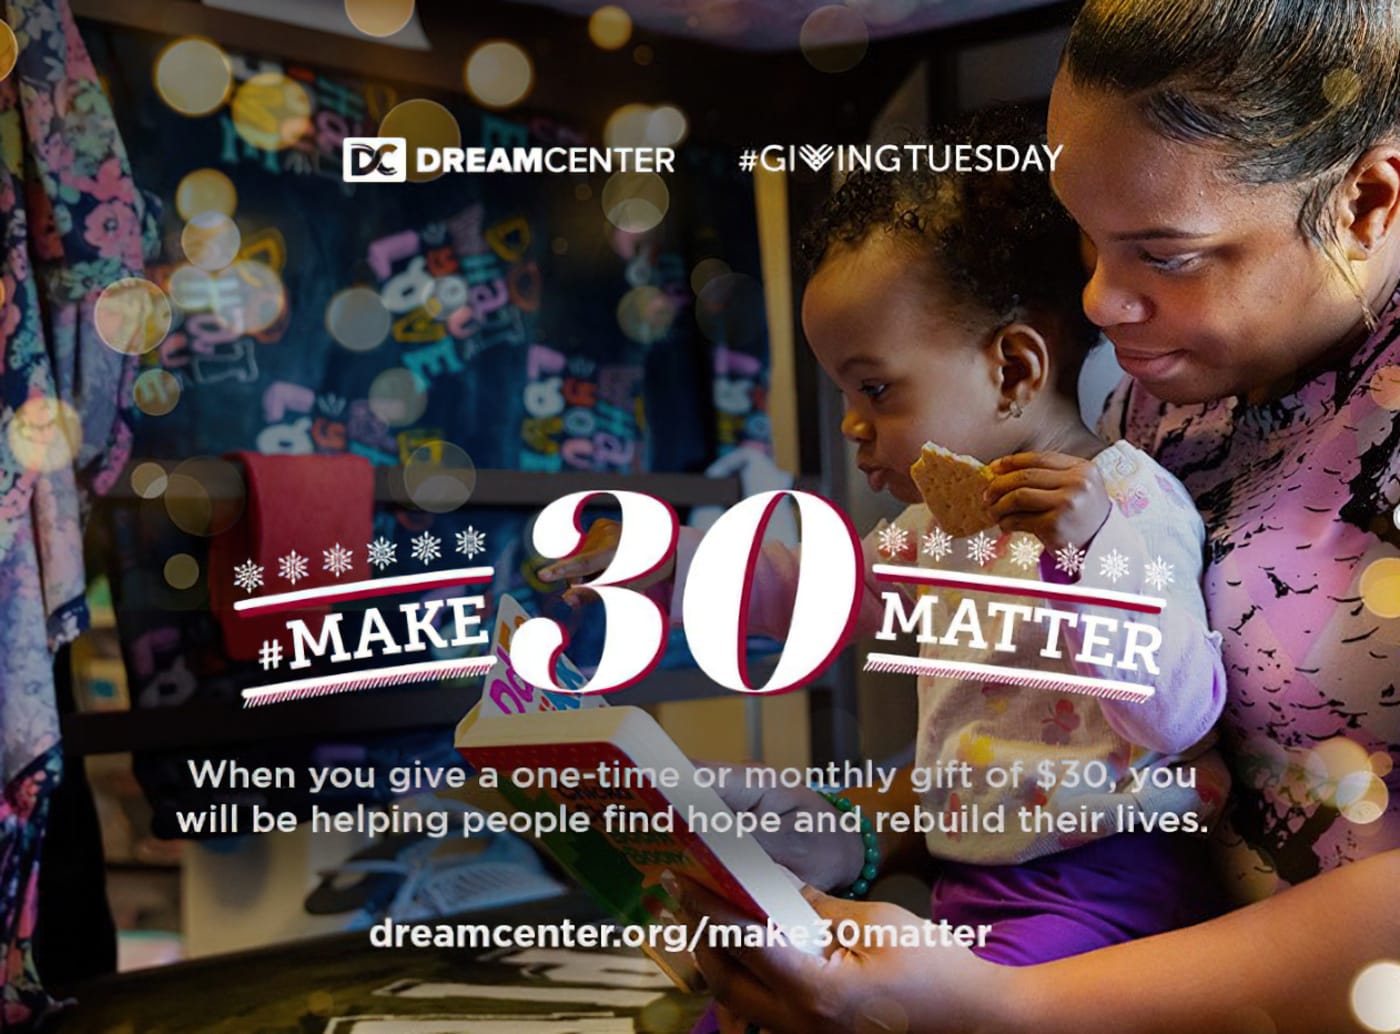 The Los Angeles Dream Center is kicking off its “Make 30 Matter” campaign to help the citizens of Los Angeles overcome financial hurdles.